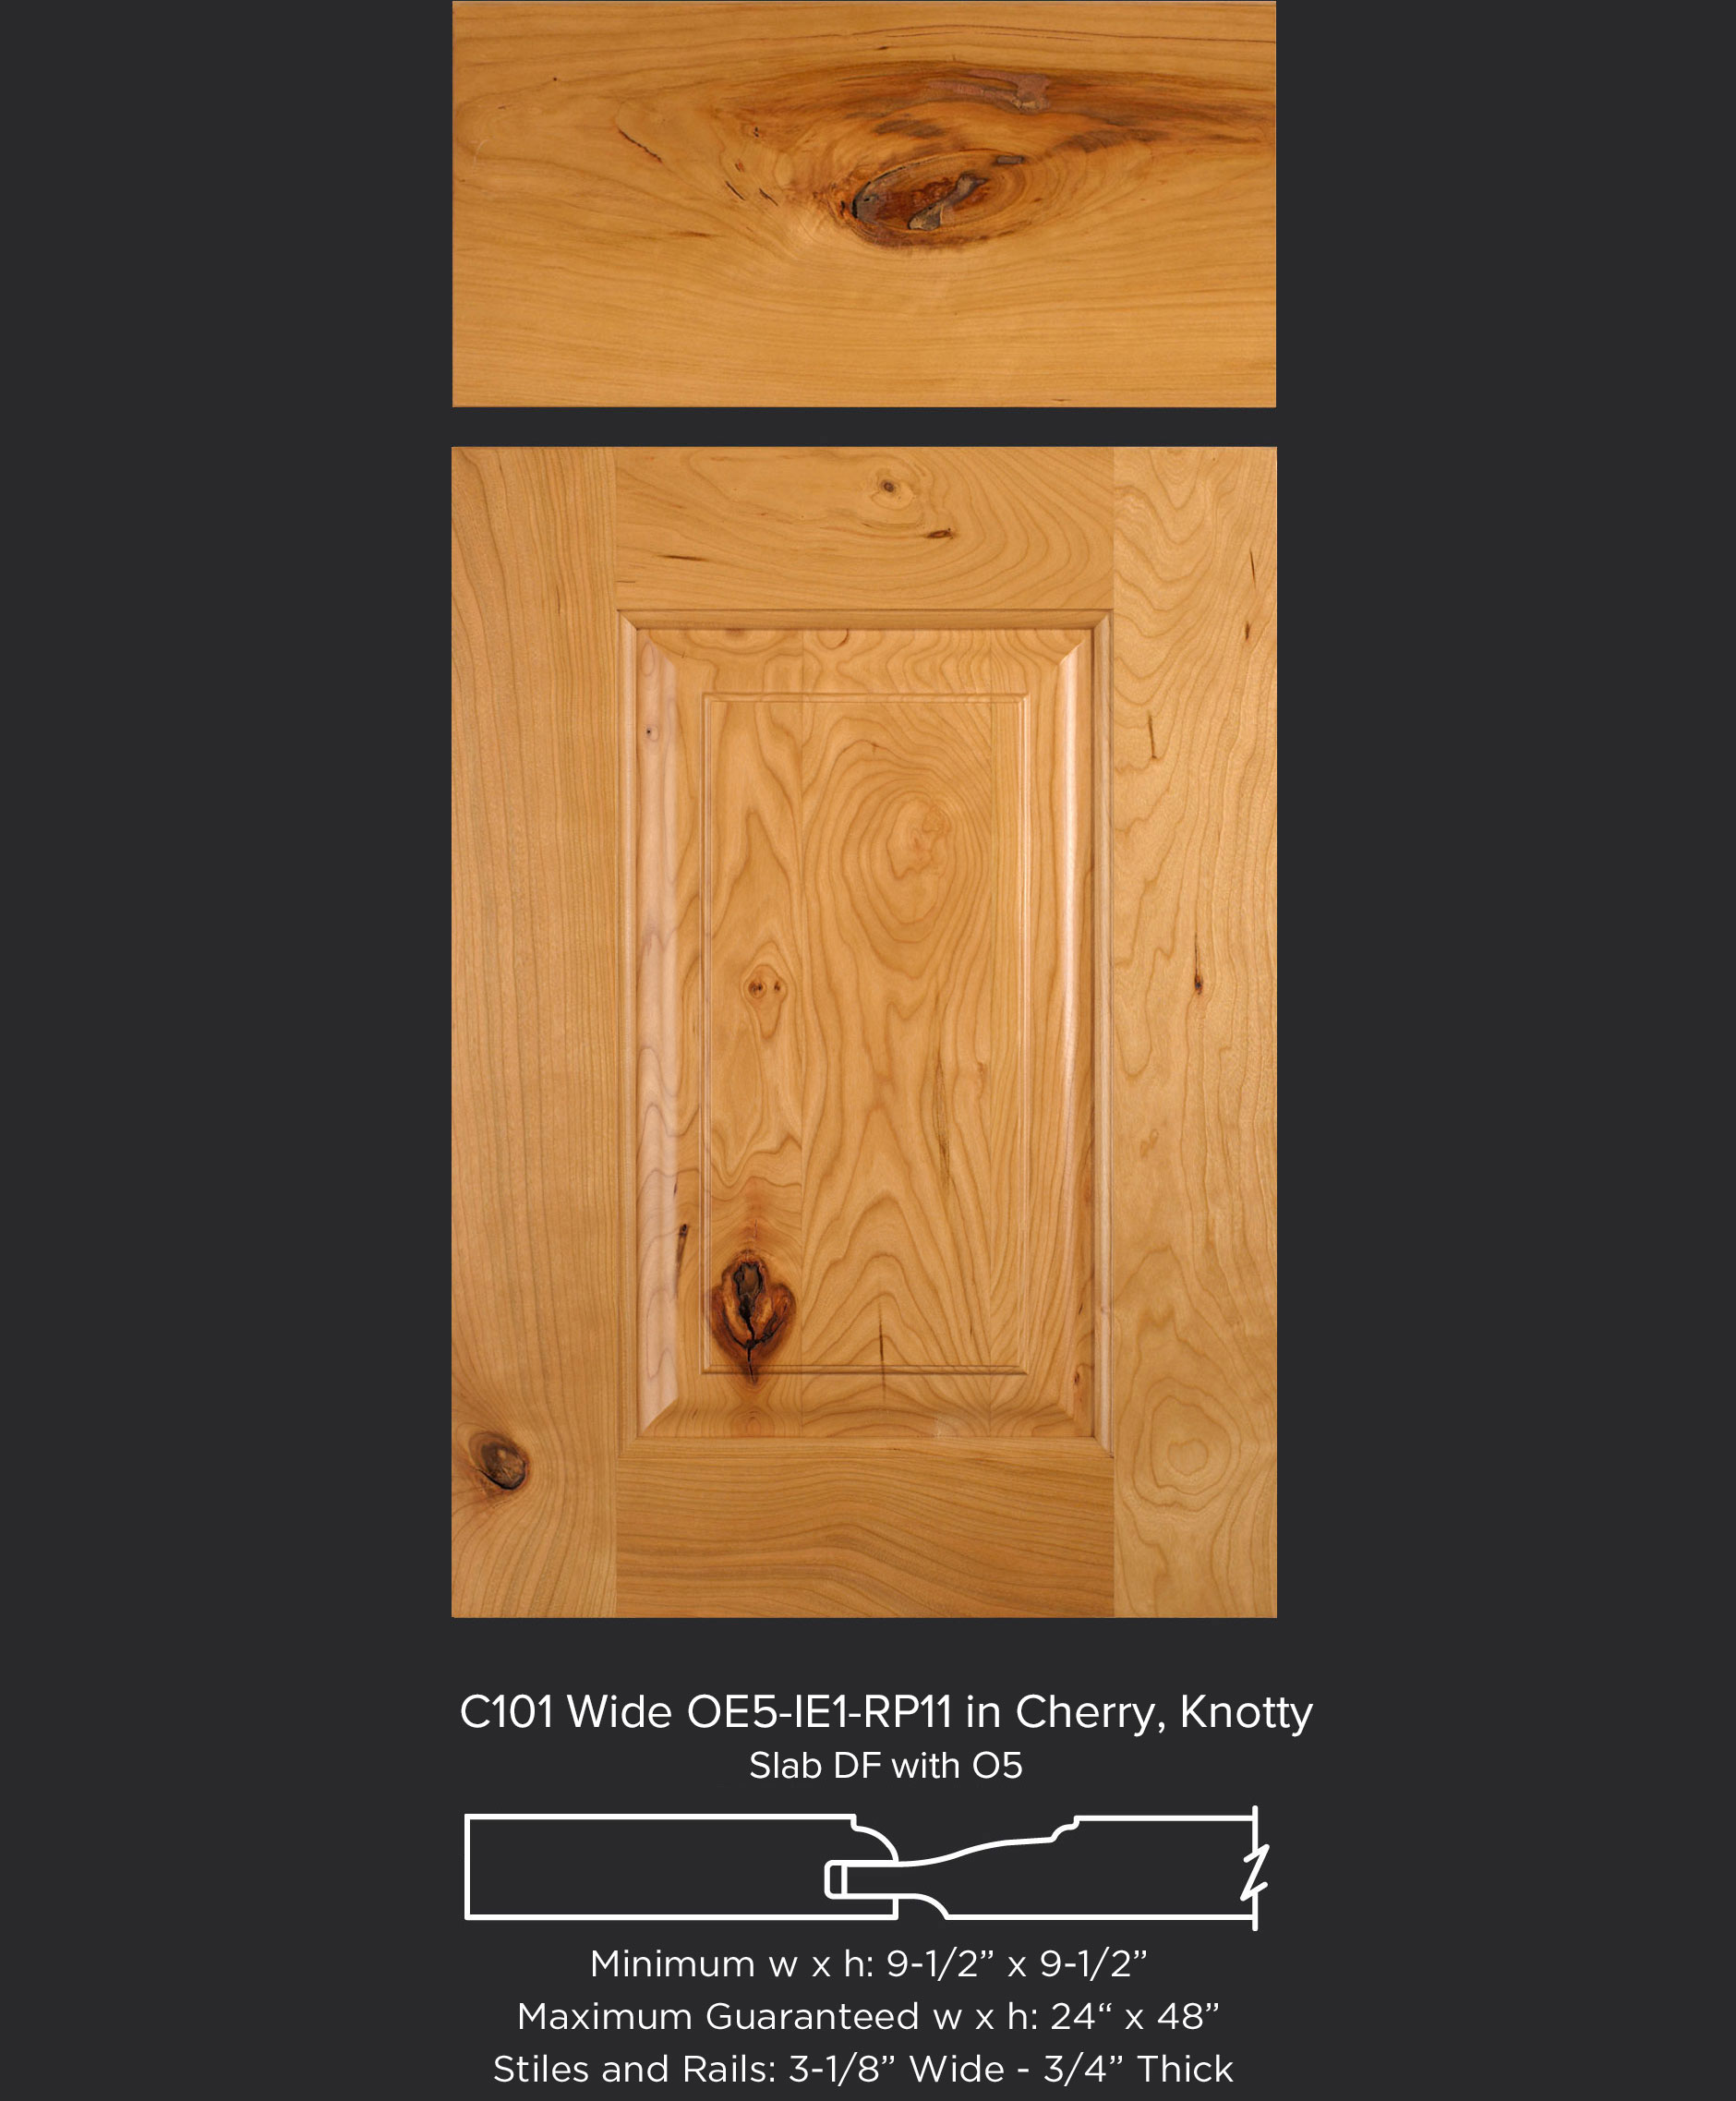 Cope and Stick Cabinet Door C101 Wide OE5-IE1-RP11 in Cherry, Knotty - Slab drawer front with OE5